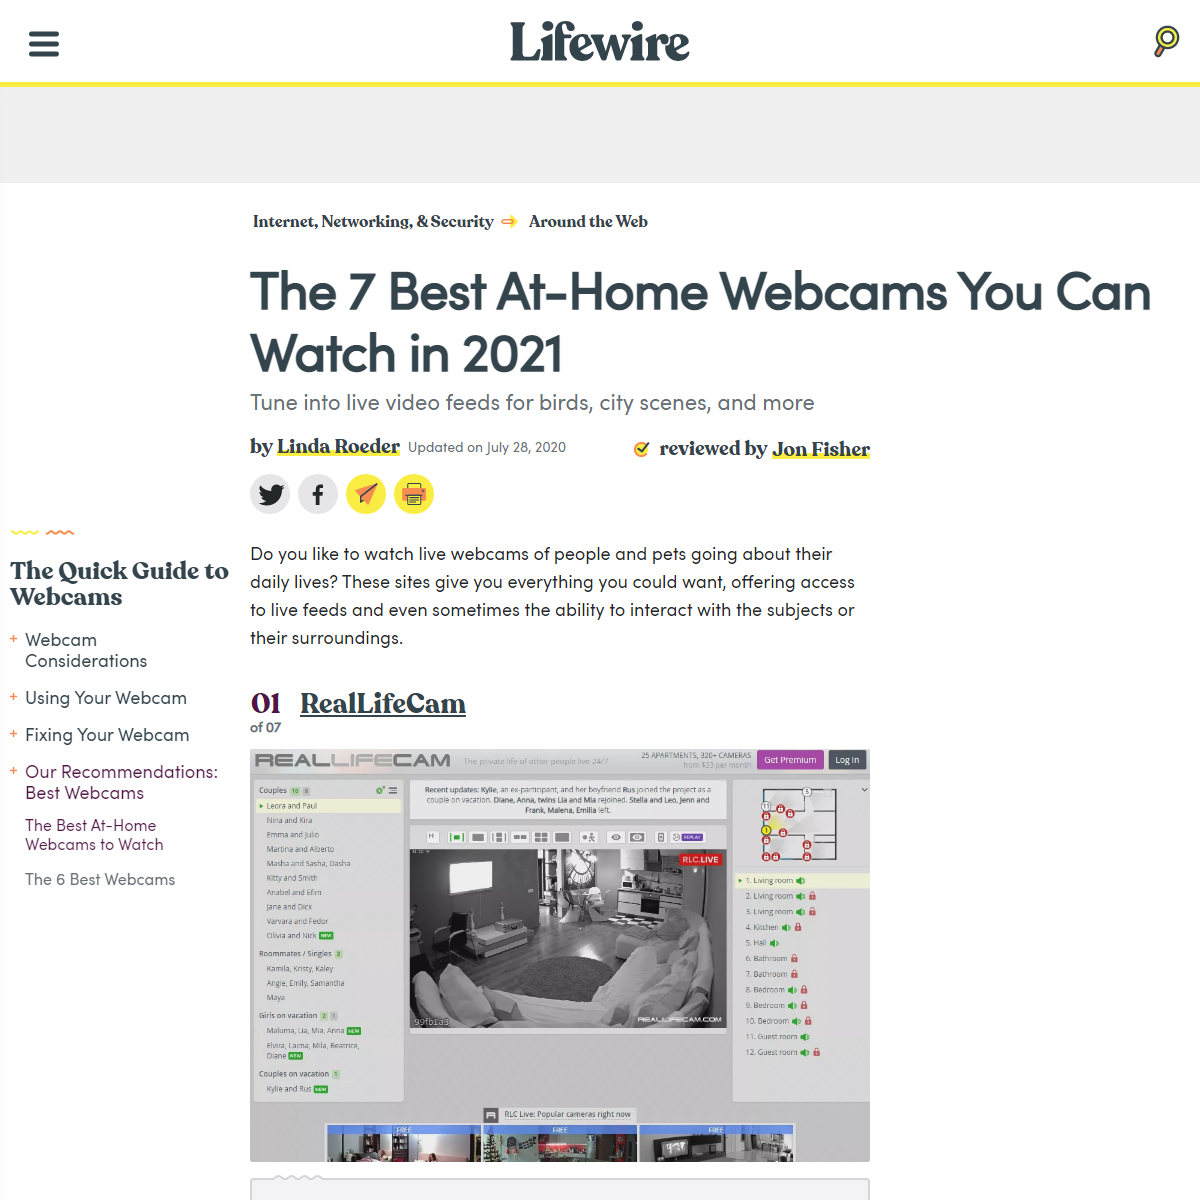 A complete backup of https://www.lifewire.com/top-best-at-home-webcams-2654560